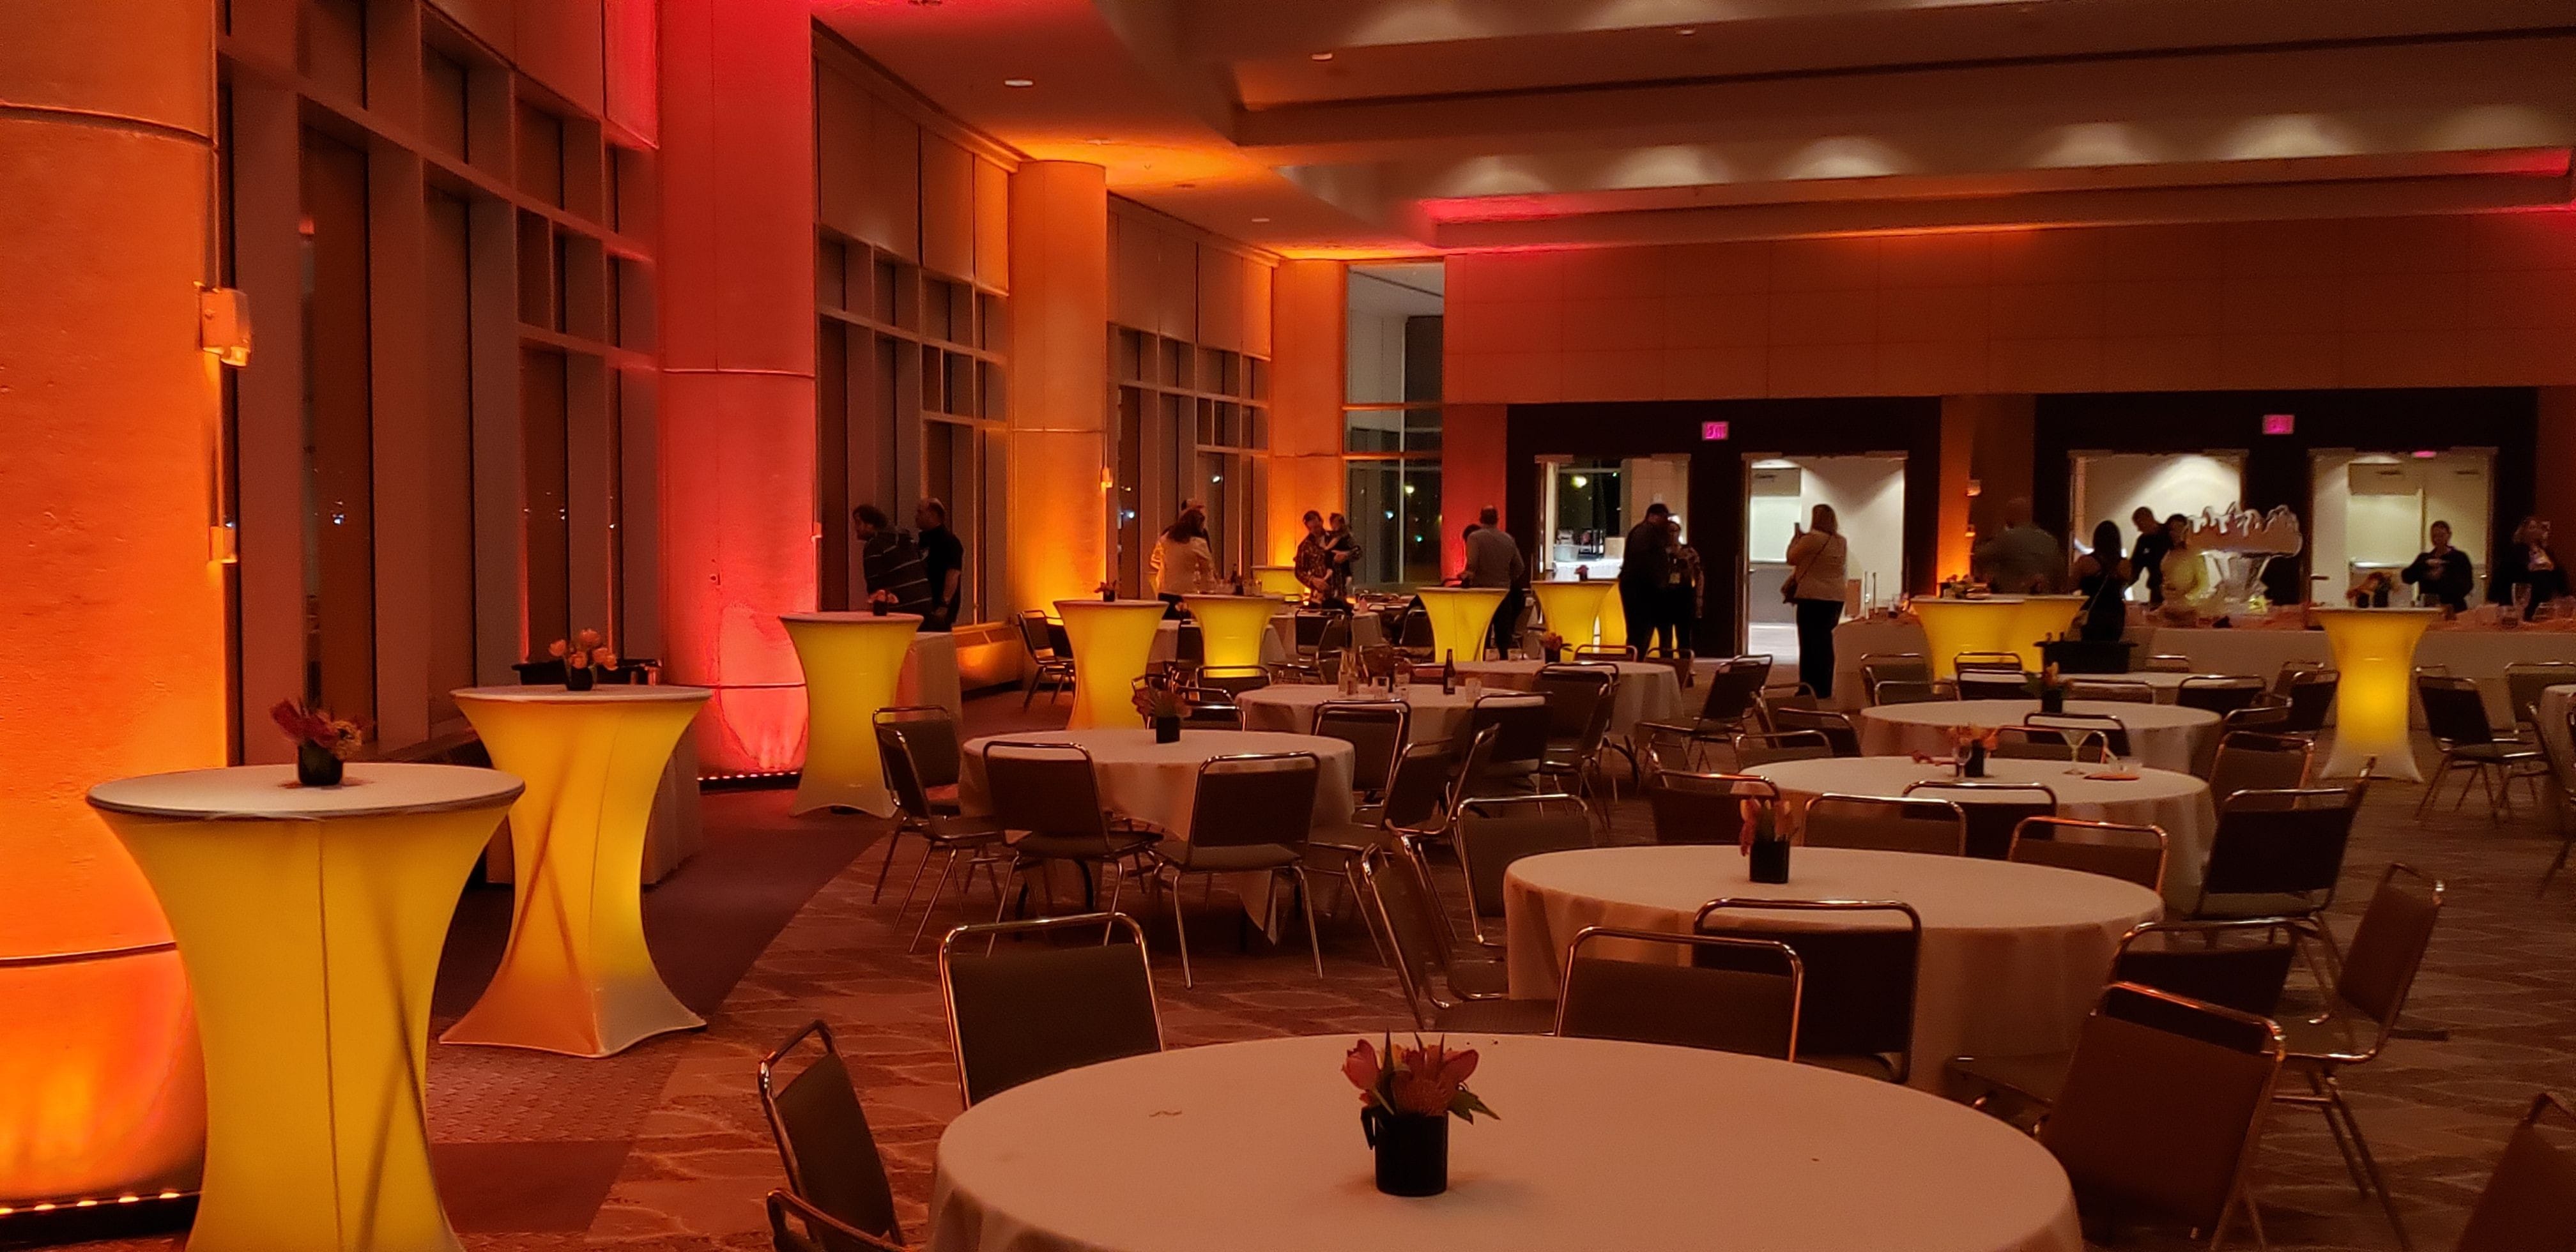 Upper Lakes Foods Dinner at Harbor side Ballroom with amber cocktail tables and orange up lighting.